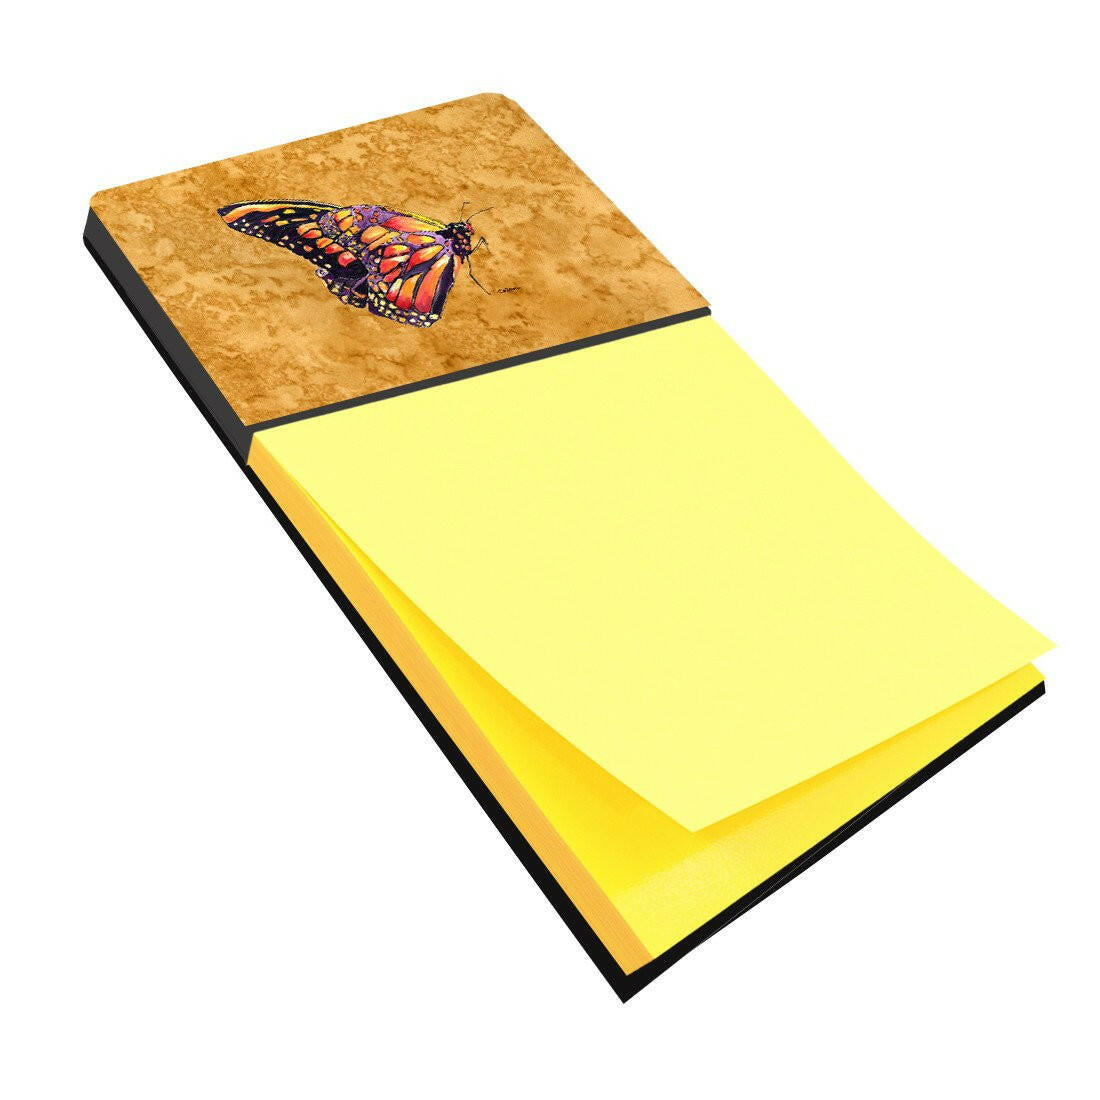 Butterfly on Gold Refiillable Sticky Note Holder or Postit Note Dispenser 8858SN by Caroline's Treasures